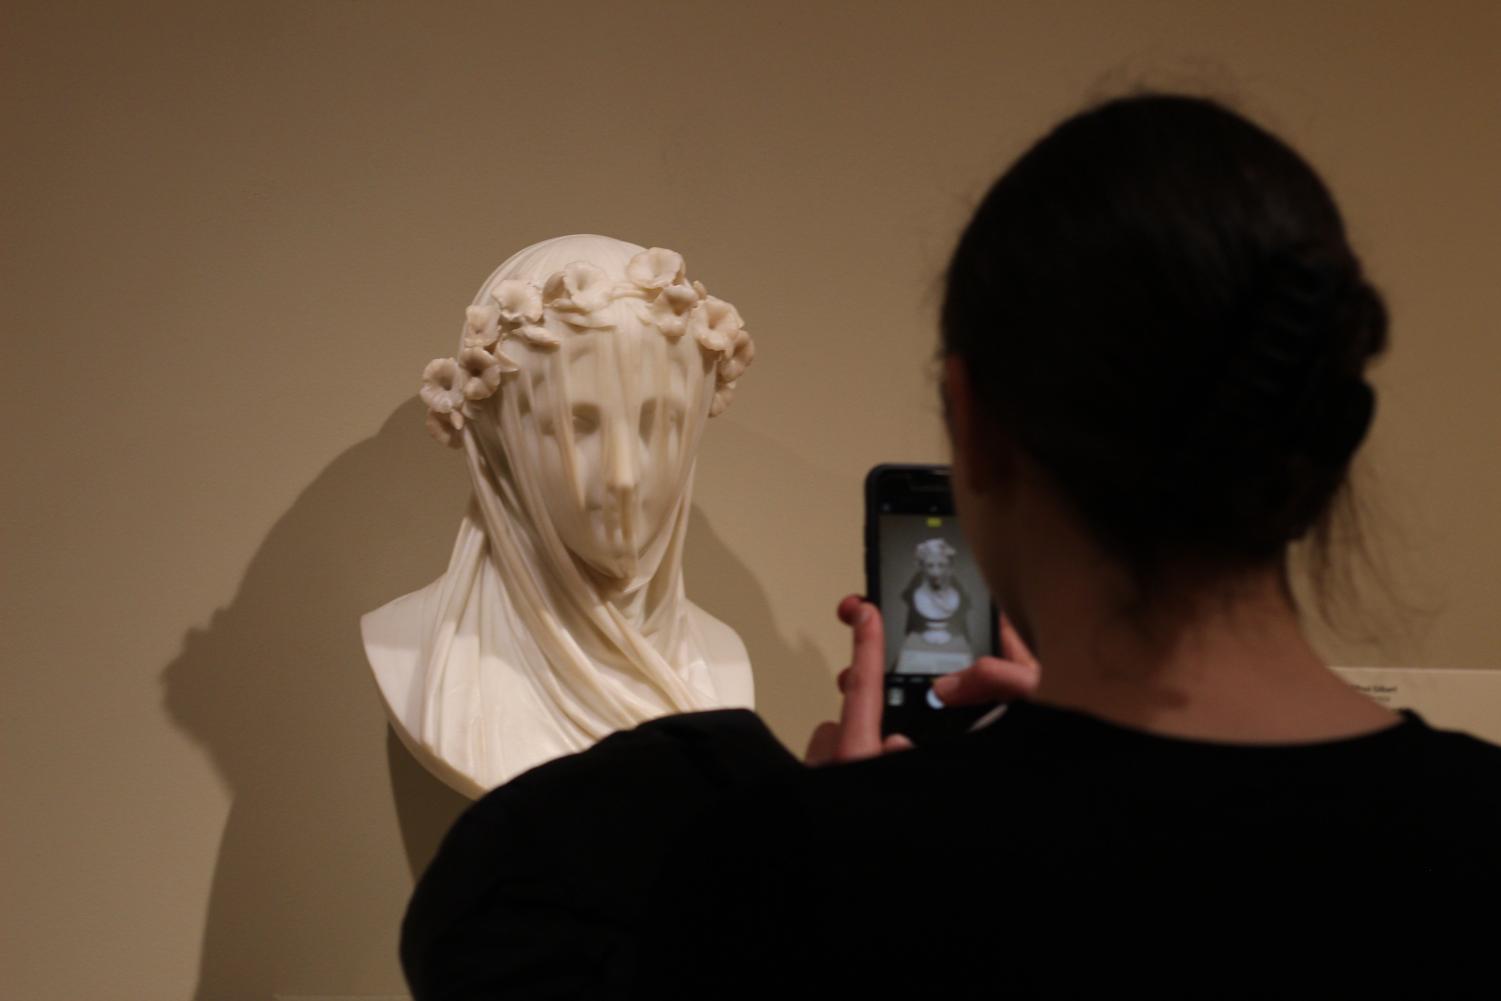 CFHS Humanities students adored The Veiled Lady by Raffaelle Monti for its demure expression and expertly carved features.